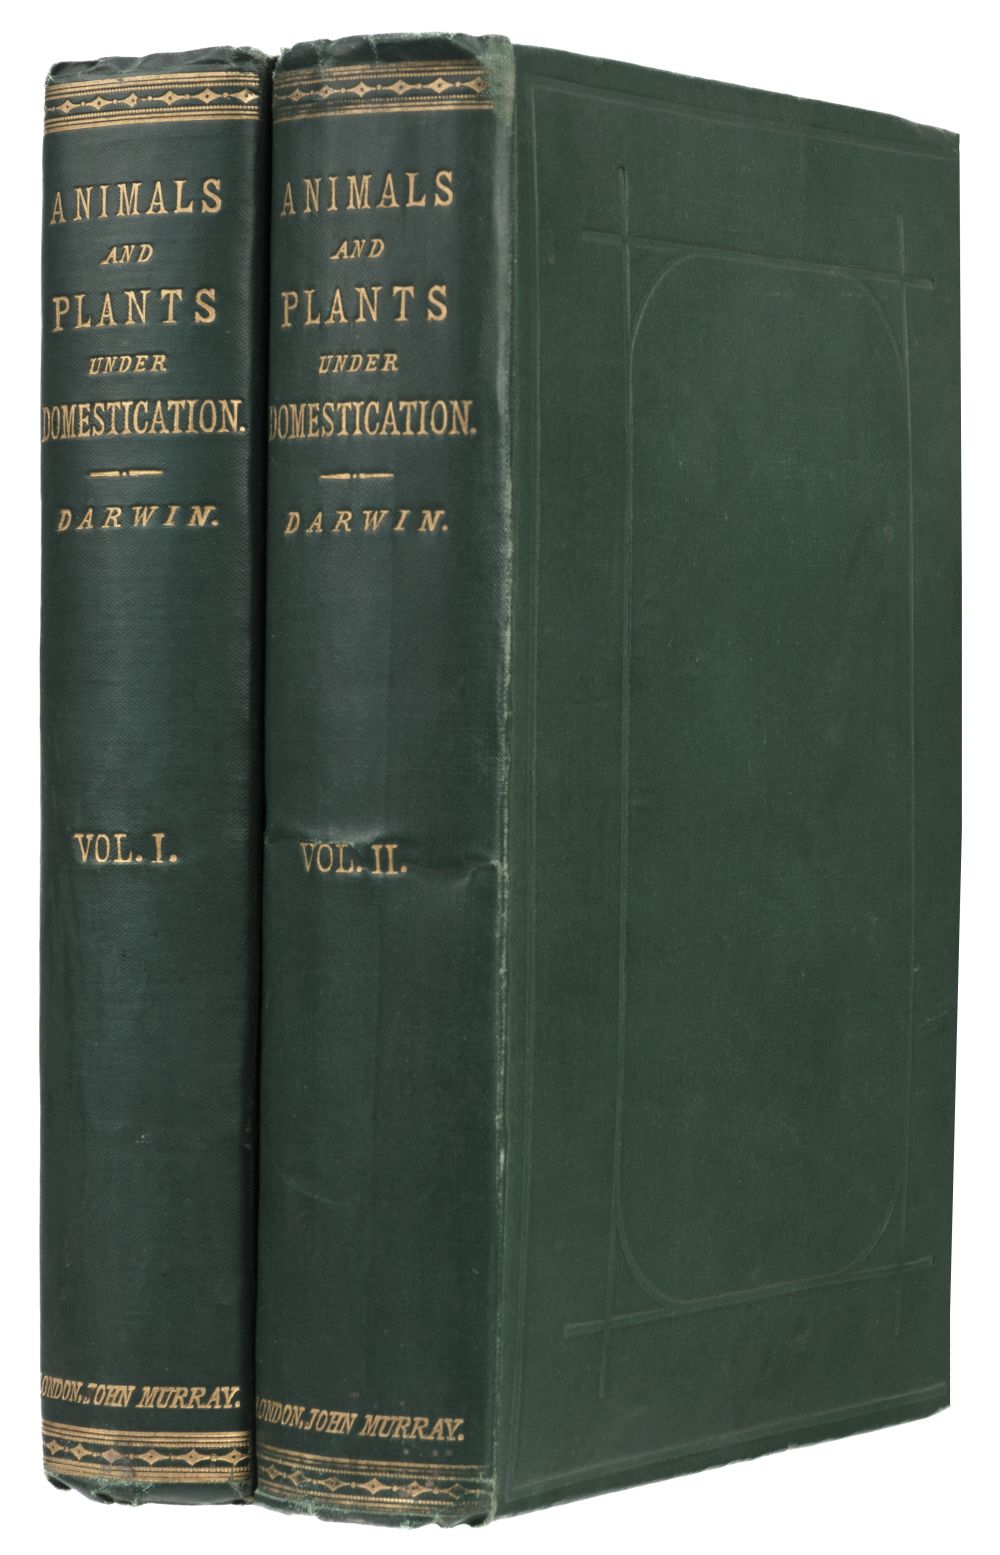 Darwin (Charles). The Variation of Animals and Plants under Domestication, 1st edition, 1868